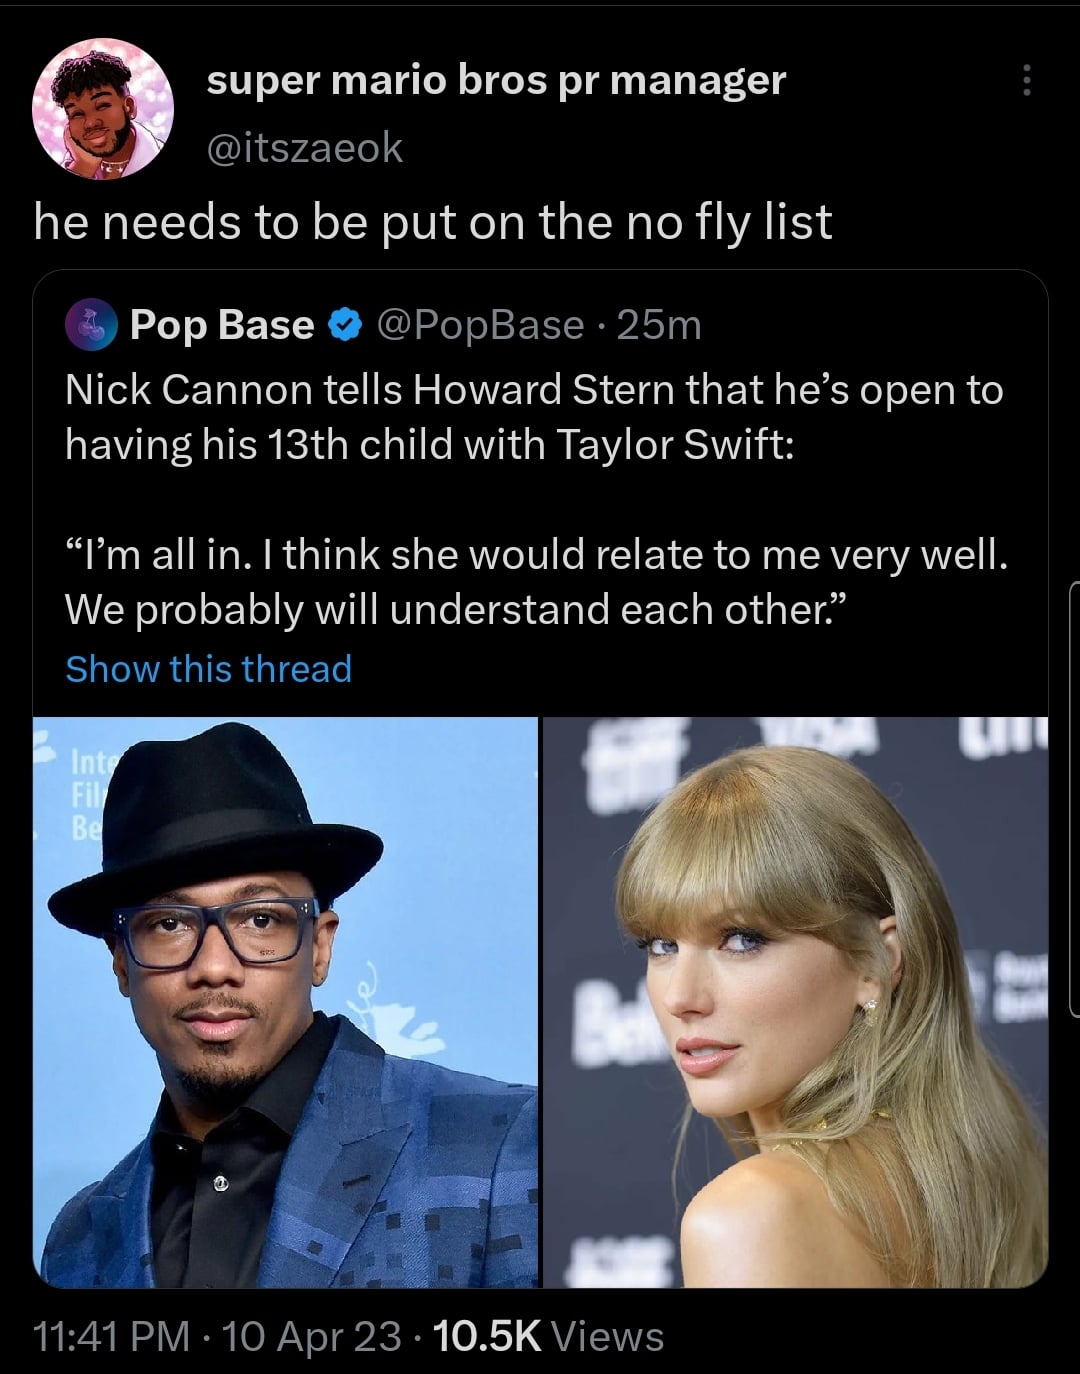 photo caption - super mario bros pr manager he needs to be put on the no fly list Pop Base 25m Nick Cannon tells Howard Stern that he's open to having his 13th child with Taylor Swift "I'm all in. I think she would relate to me very well. We probably will